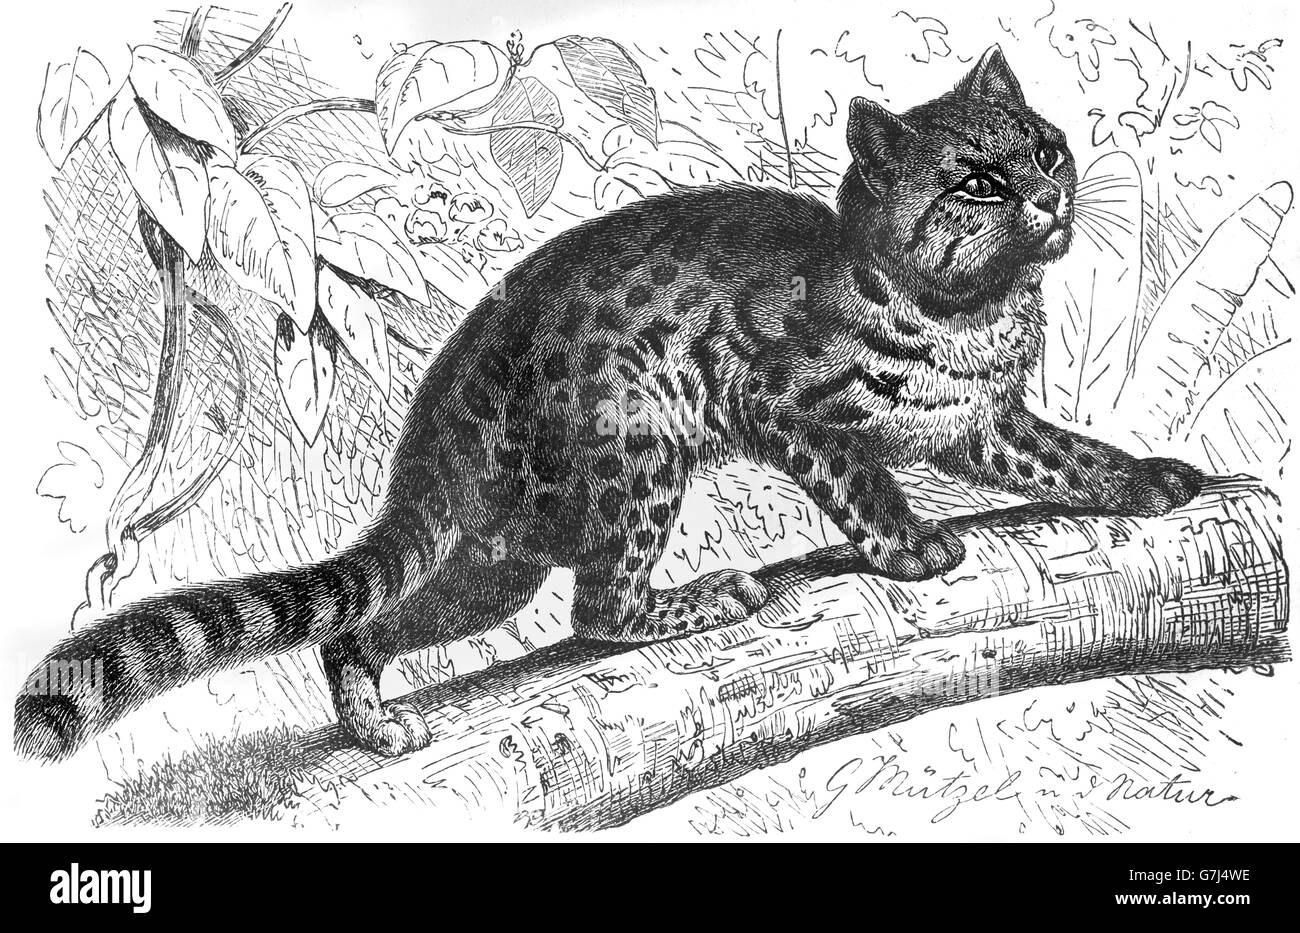 Oncilla, Leopardus tigrinus, little spotted cat, tigrillo, tiger cat, Feliformia, Felidae, illustration from book dated 1904 Stock Photo